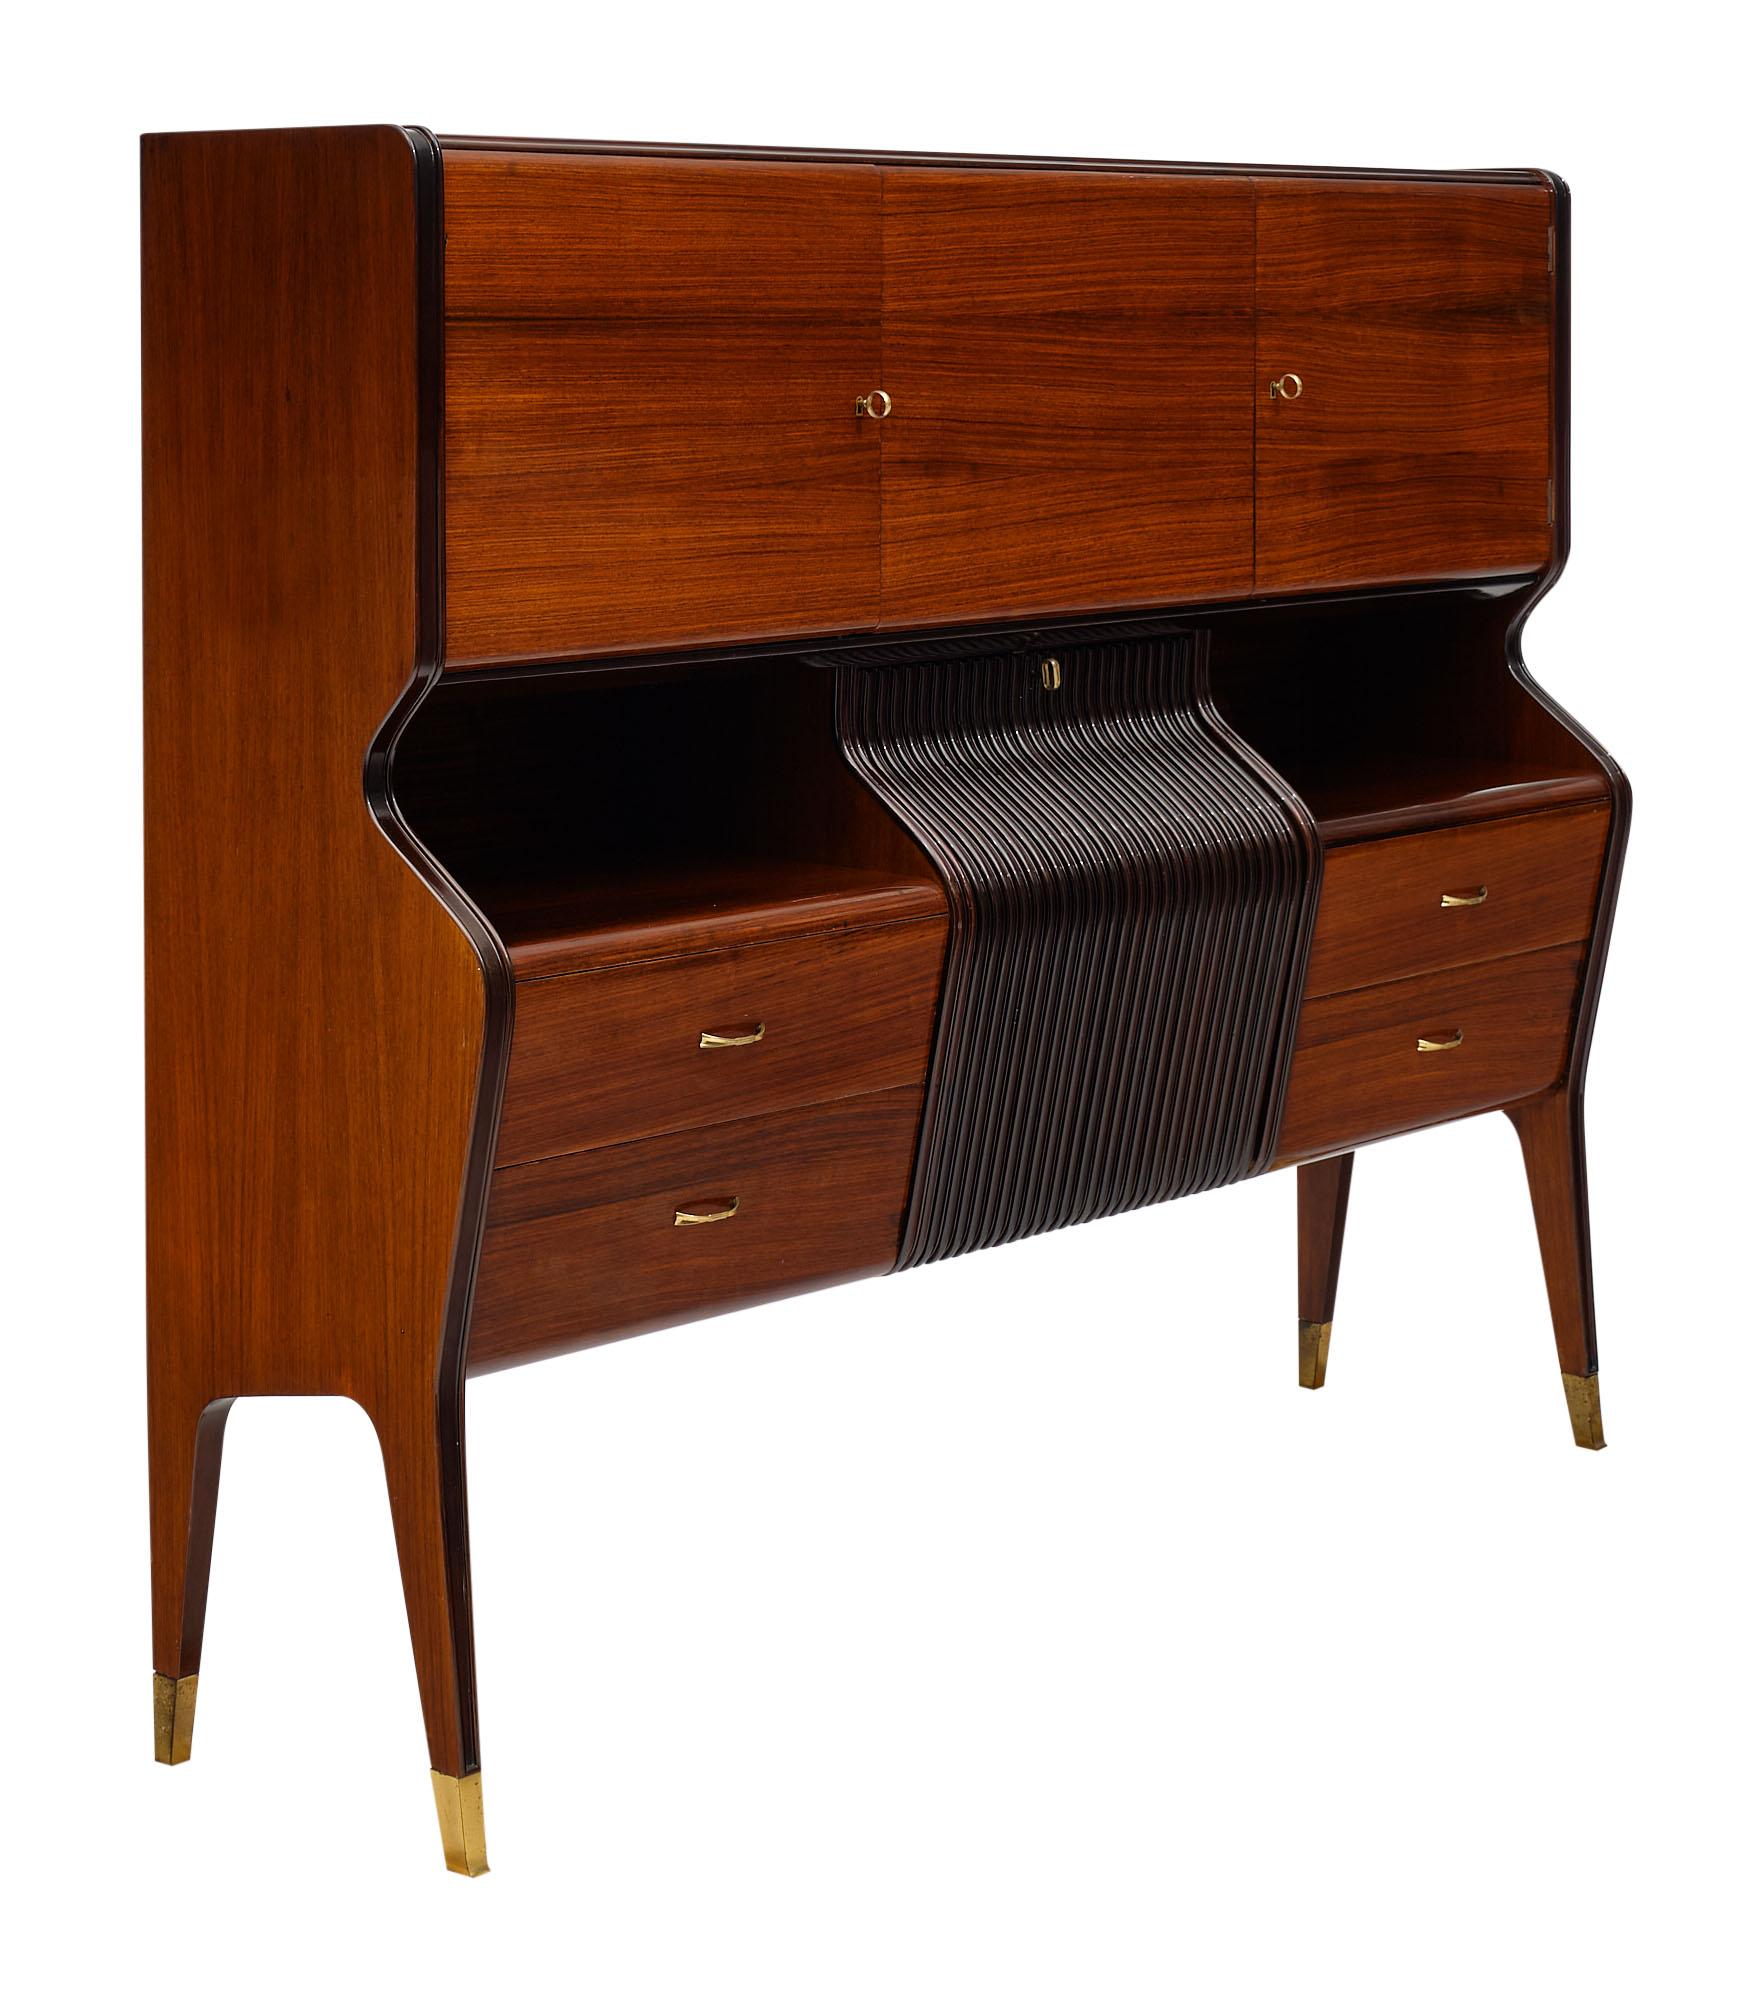 Buffet enfilade with bar from Italy. This mid-century piece is by Osvaldo Borsani and made of Brazilian rosewood, tinted rosewood, and satin wood interior. This spectacular cabinet features ample storage in its base and full bar with glass shelves